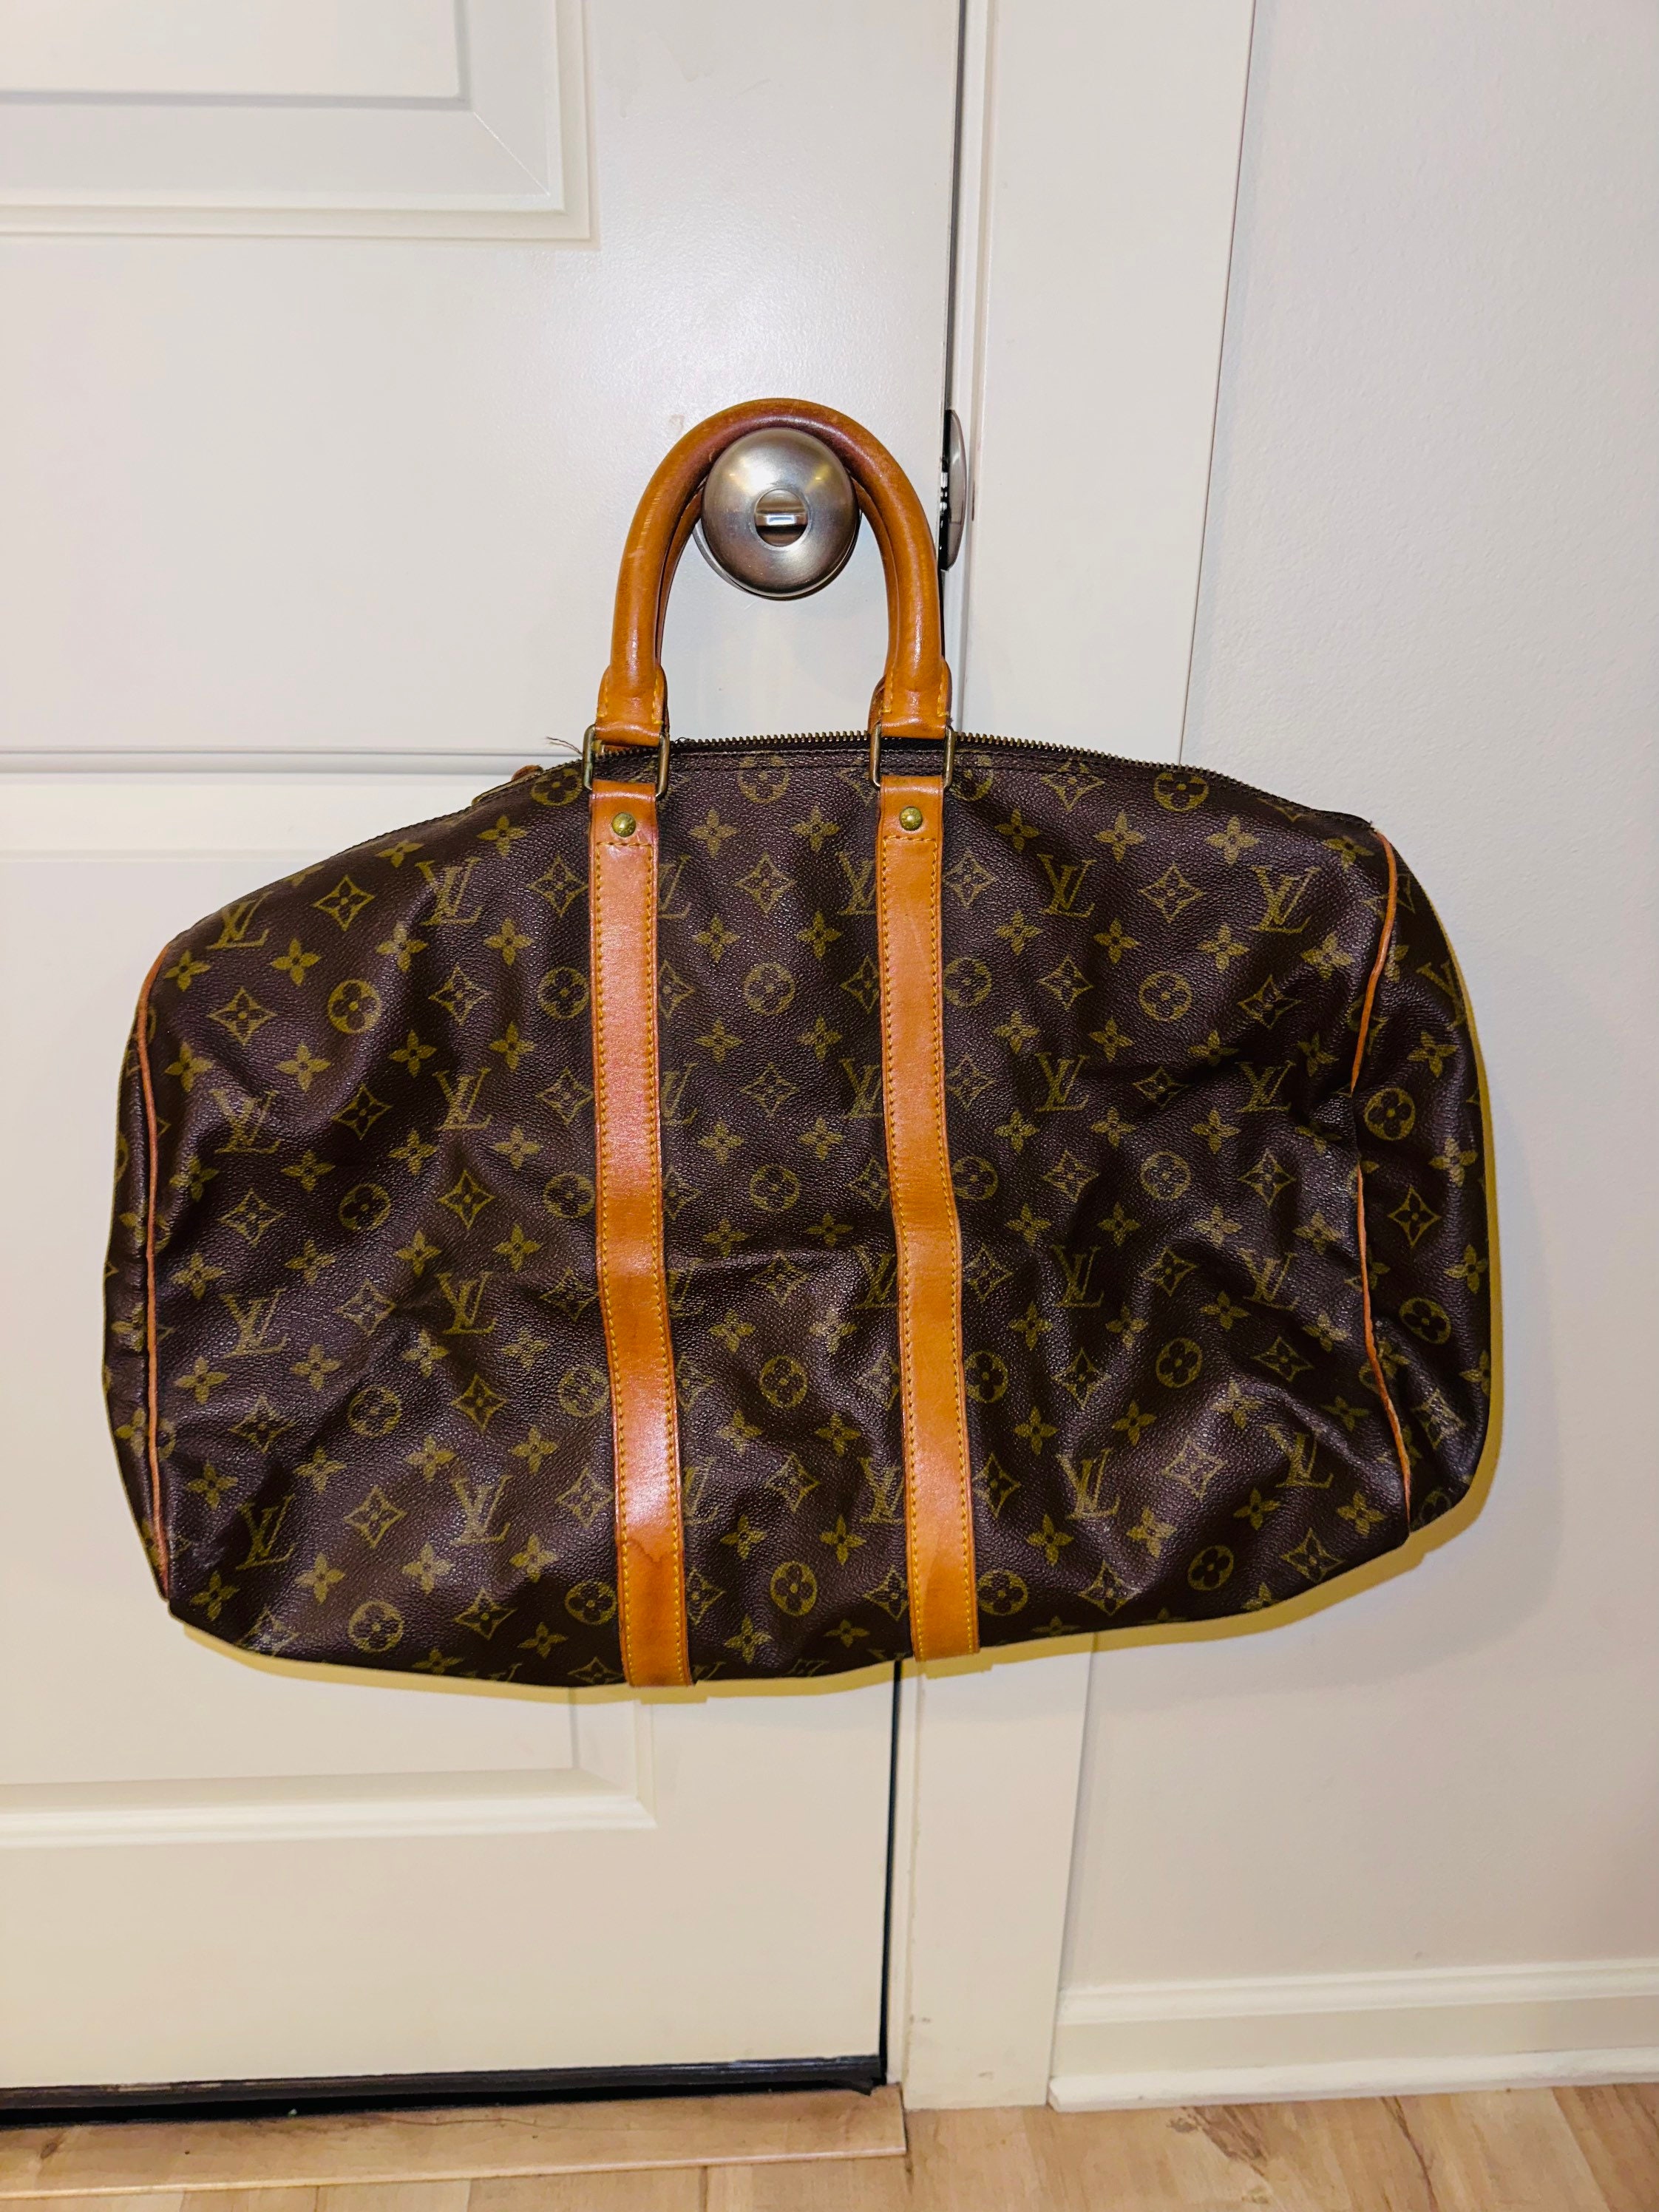 About how much would it cost to replace the handles, strap, and all the  vachetta leather on the outside of the keepall bandouliere 50? : r/ Louisvuitton